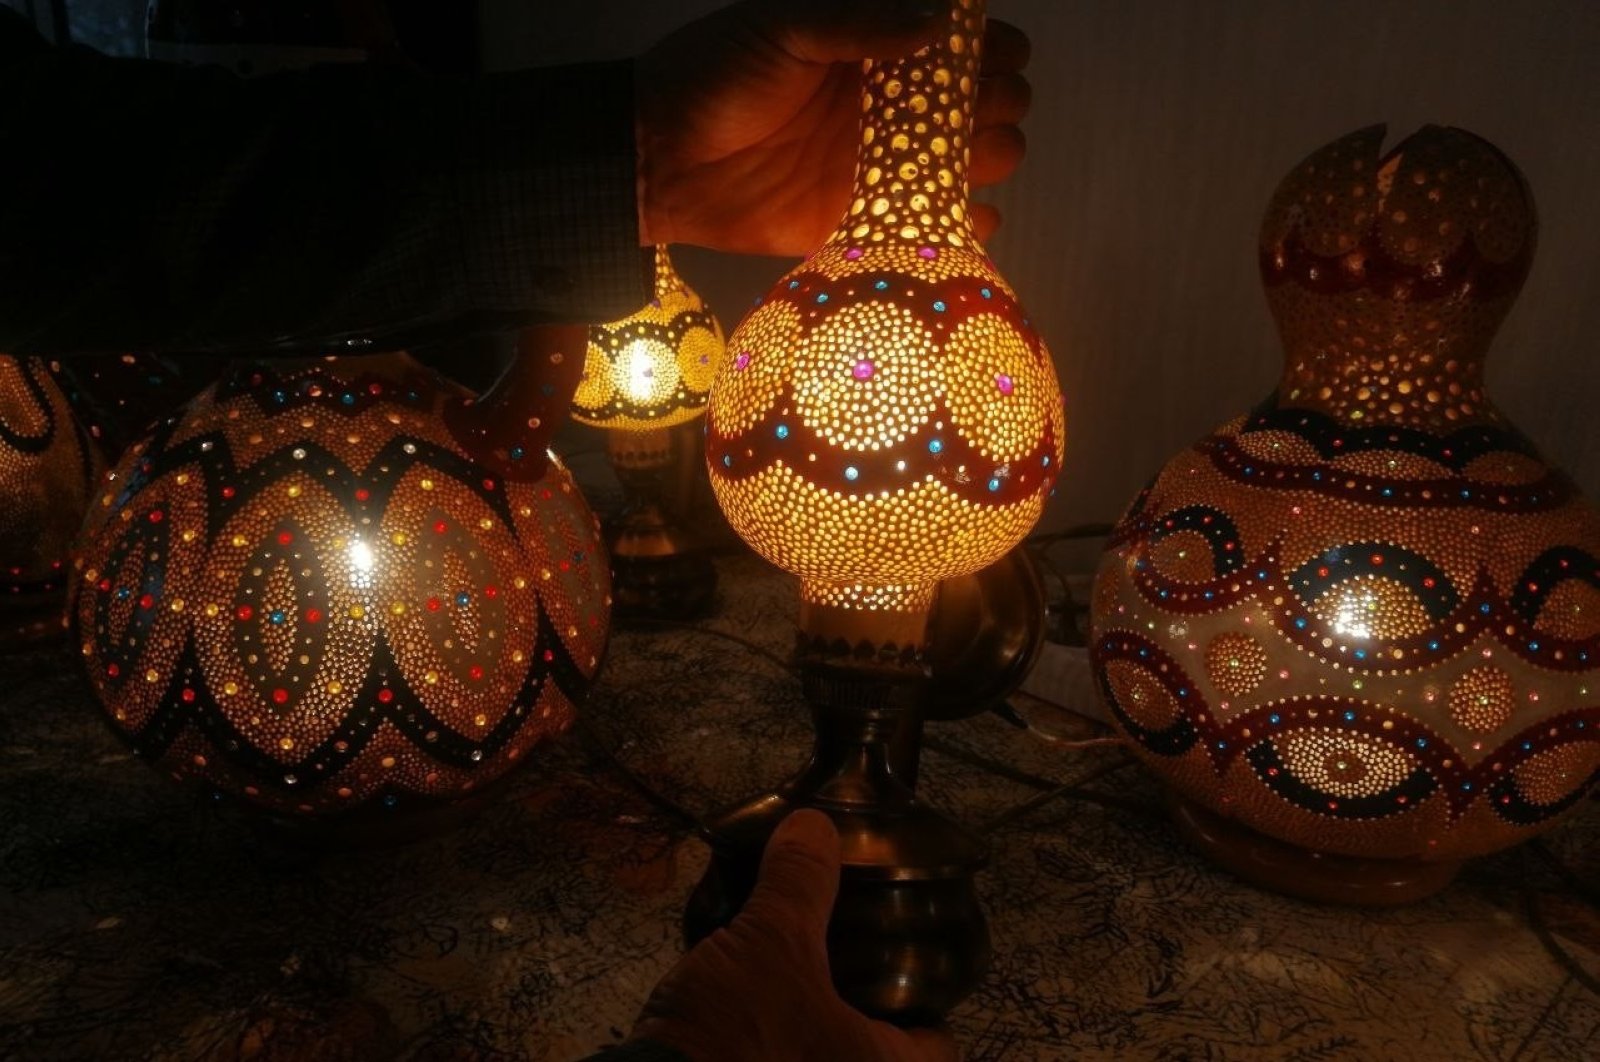 Turkish man's calabash lamp becomes countrywide business | Daily Sabah